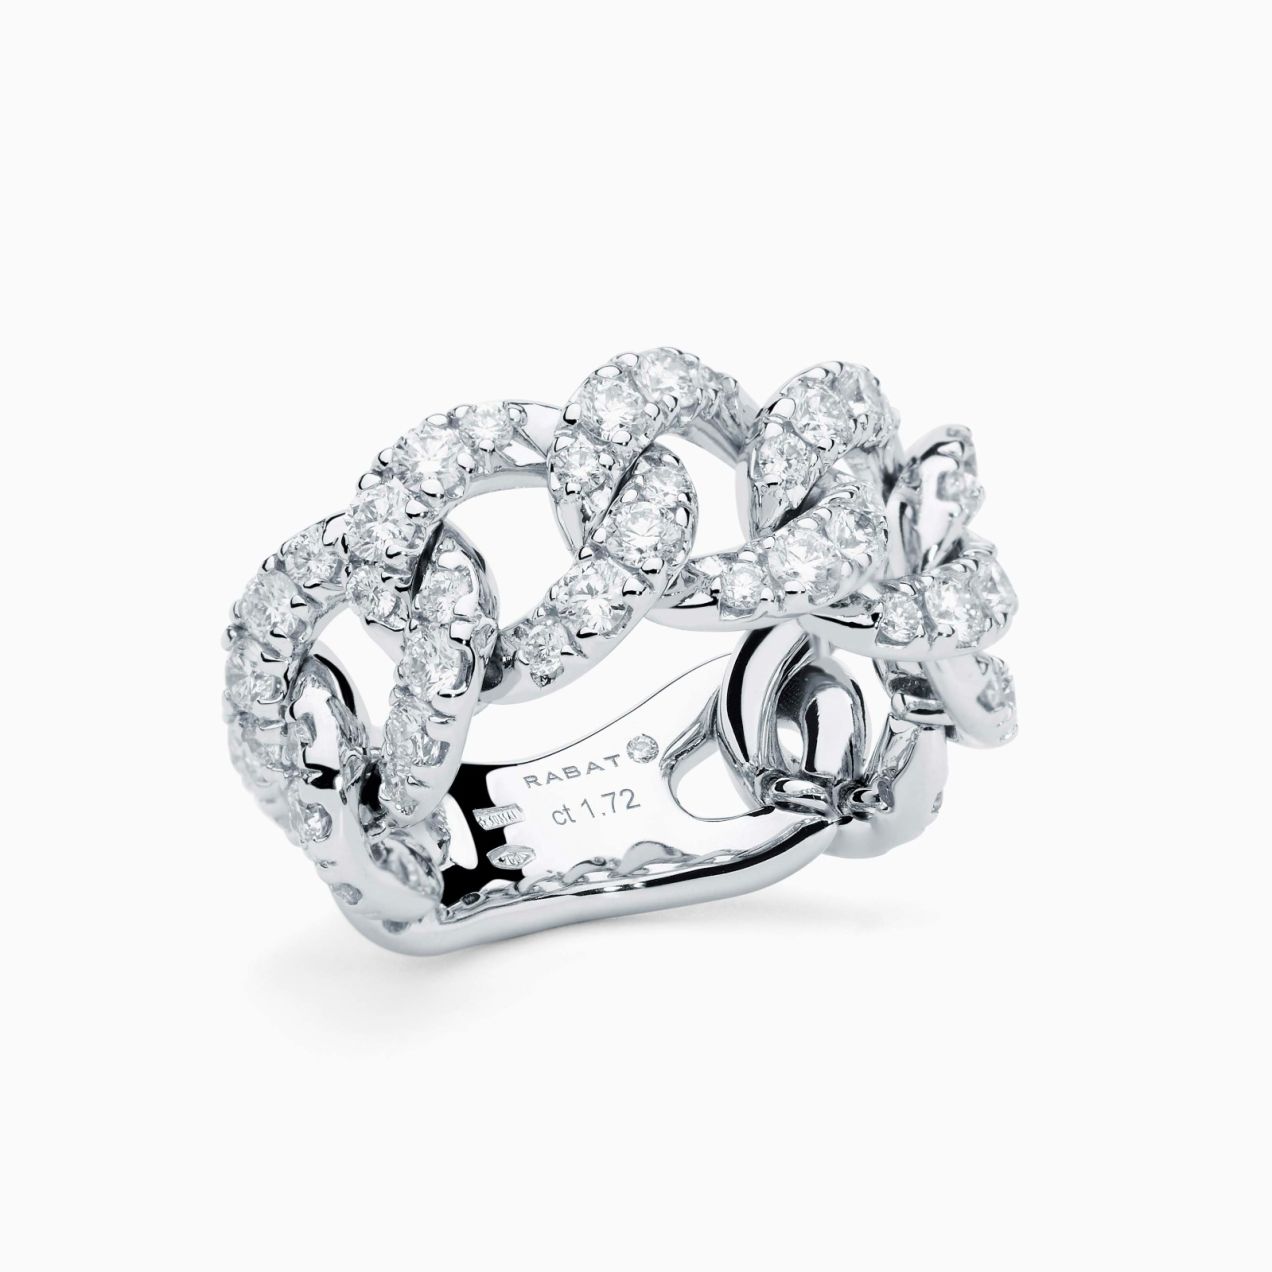 White gold with diamonds ring